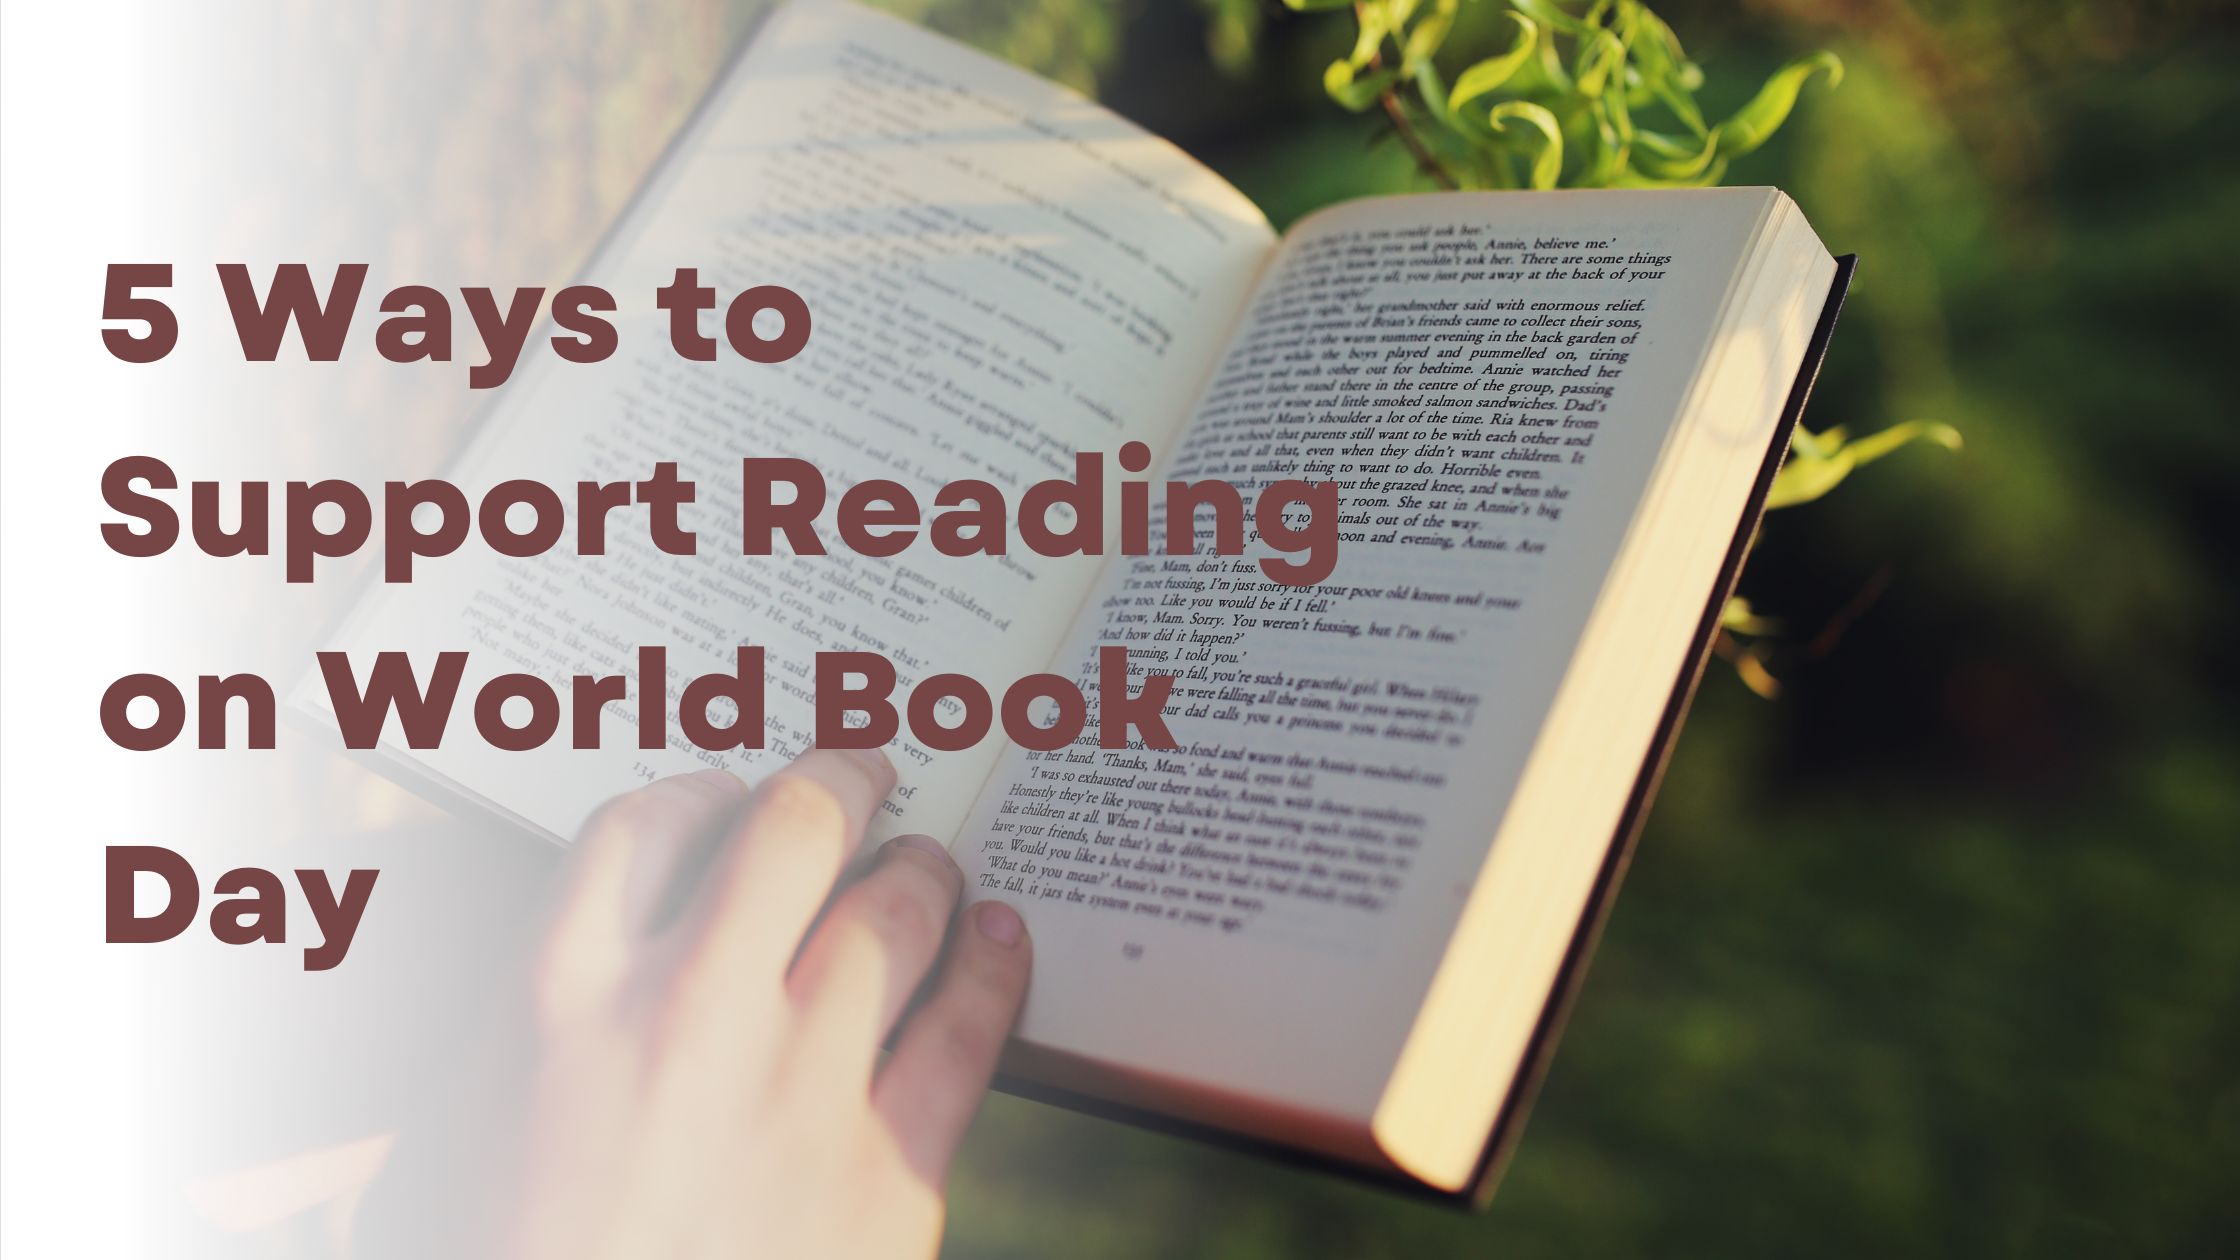 5 Ways to Support Reading on World Book Day